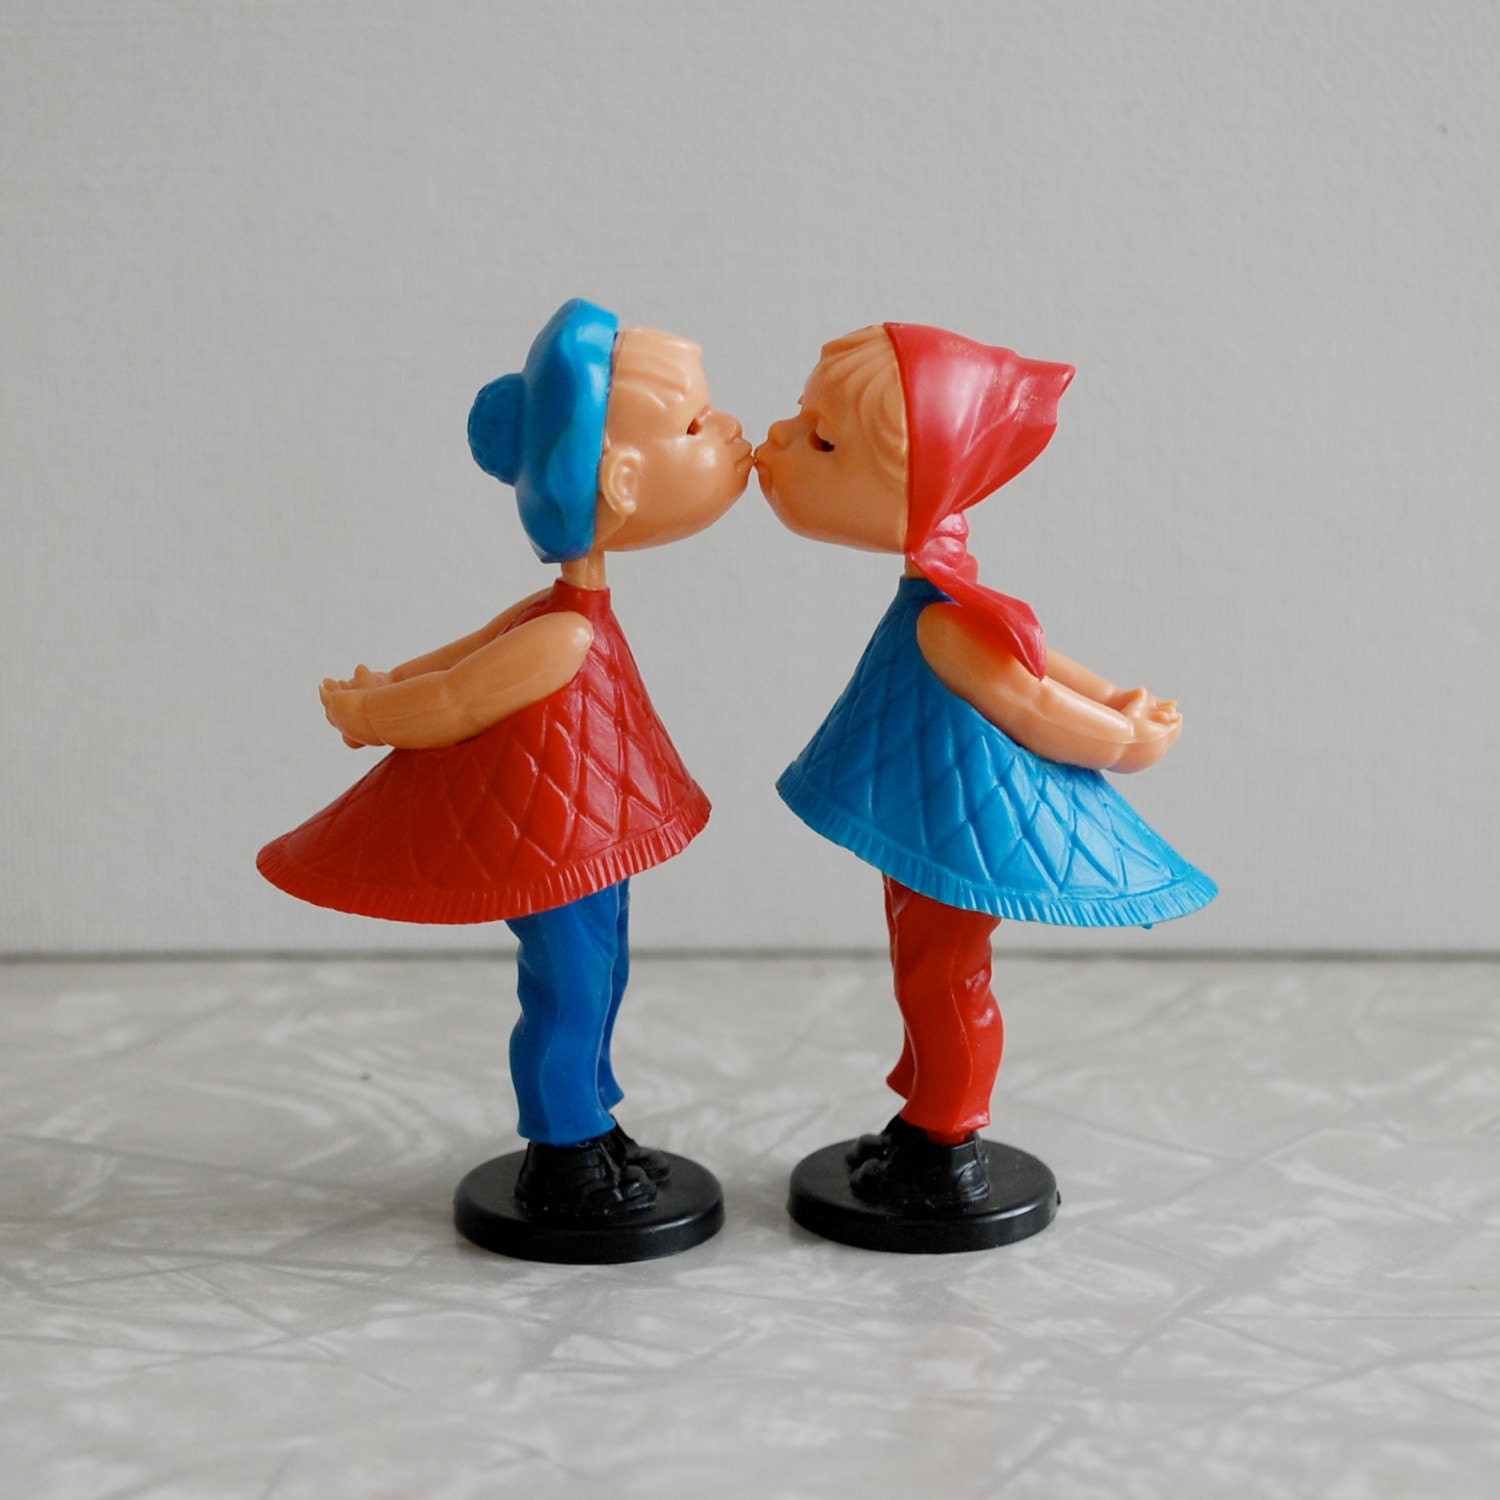 Magnetic Kissing Dolls Plastic Romeo And Julia Kissing Dolls By 8162